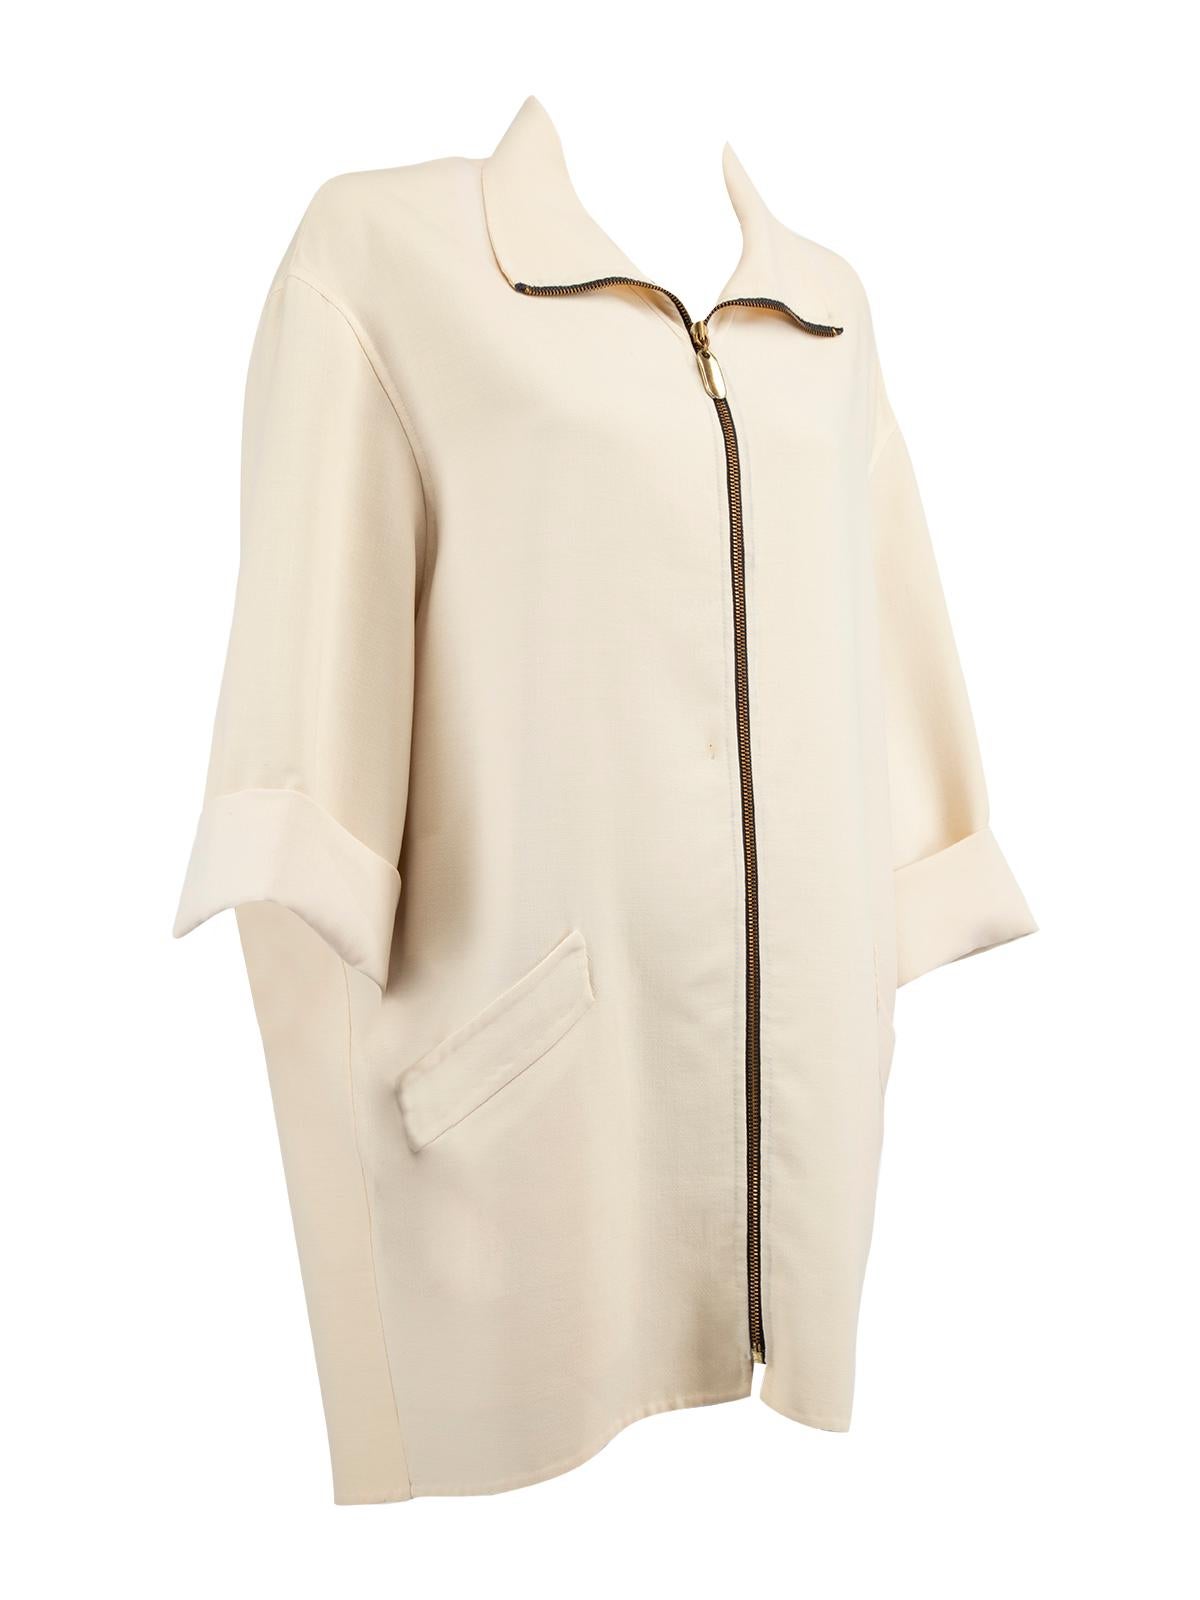 CONDITION is Good. Minor wear to coat is evident. There is a small hole/stain at the front on this used Donna Karen designer resale item.   Details  Cream Crepe Oversized coat Long sleeves Zip opening Fold up cuff 2x Front welt pocket    Composition